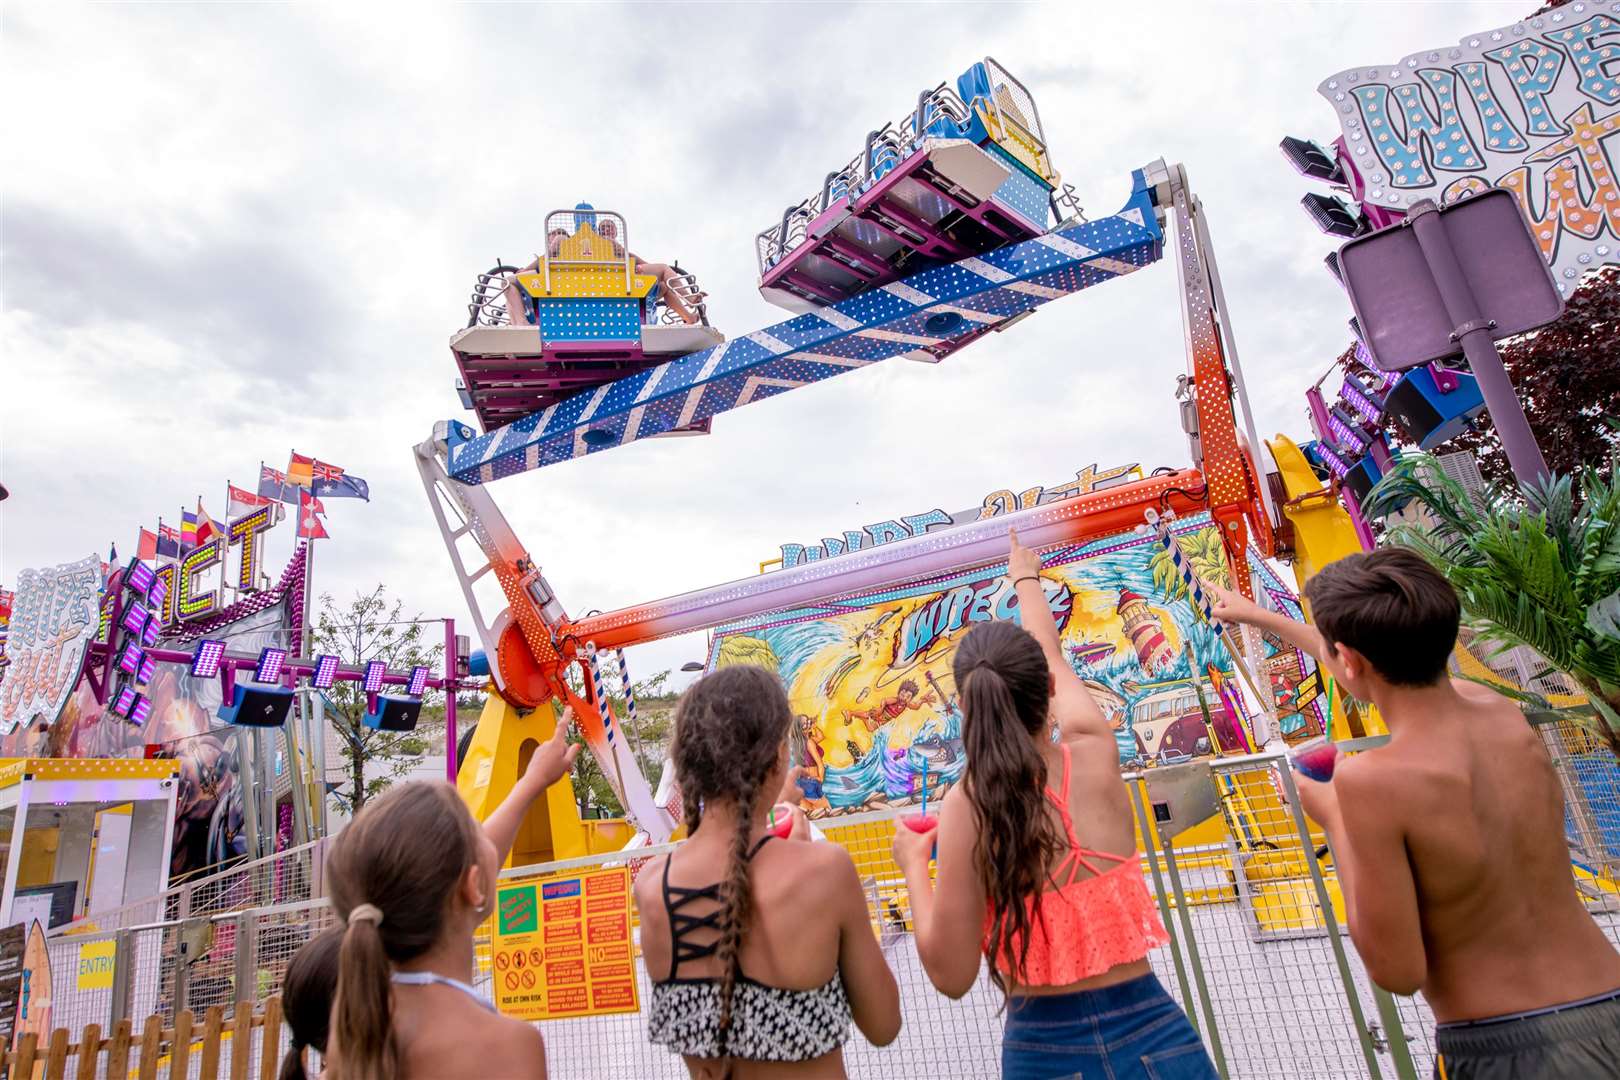 Take a look at all the rides before deciding what you most want to do